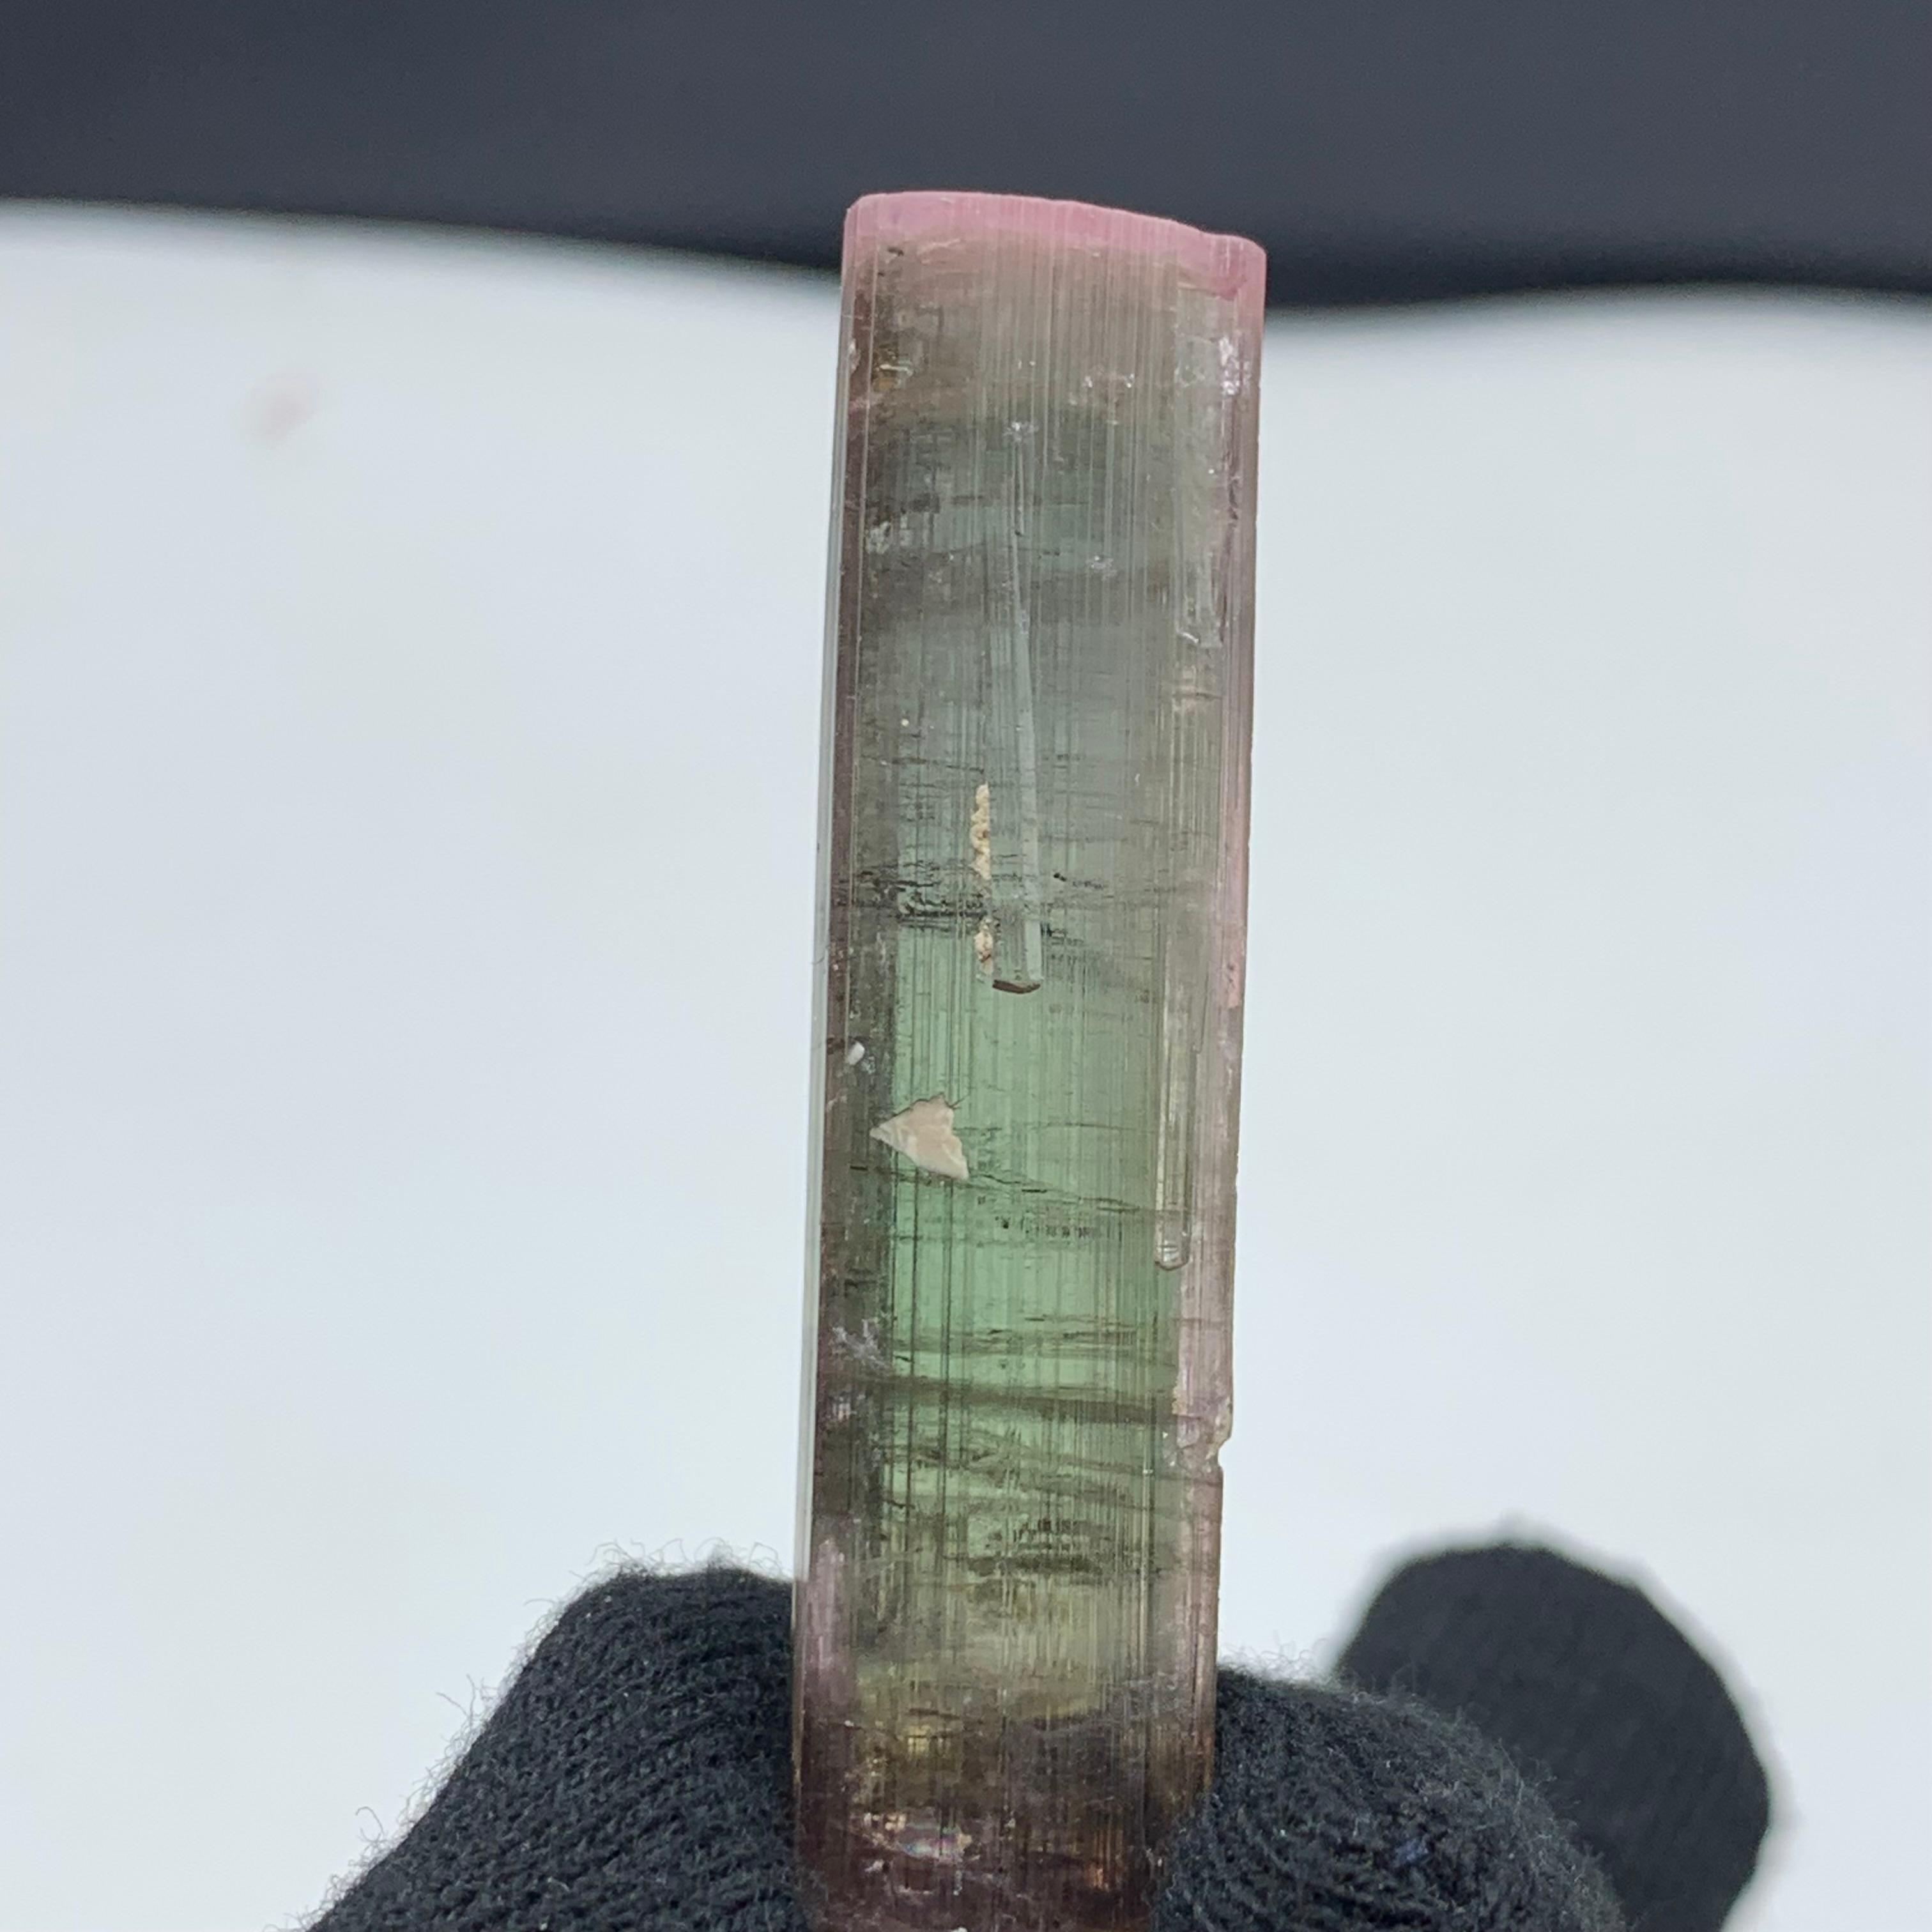 16.95 Gram Amazing Bi Color Tourmaline Crystal From Paprook Mine, Afghanistan 
Weight: 16.95 Gram
Dimension: 5.4 x 1.3 x 1.1 Cm 
Origin: Paprook Mine, Afghanistan 

Tourmaline is a crystalline silicate mineral group in which boron is compounded with